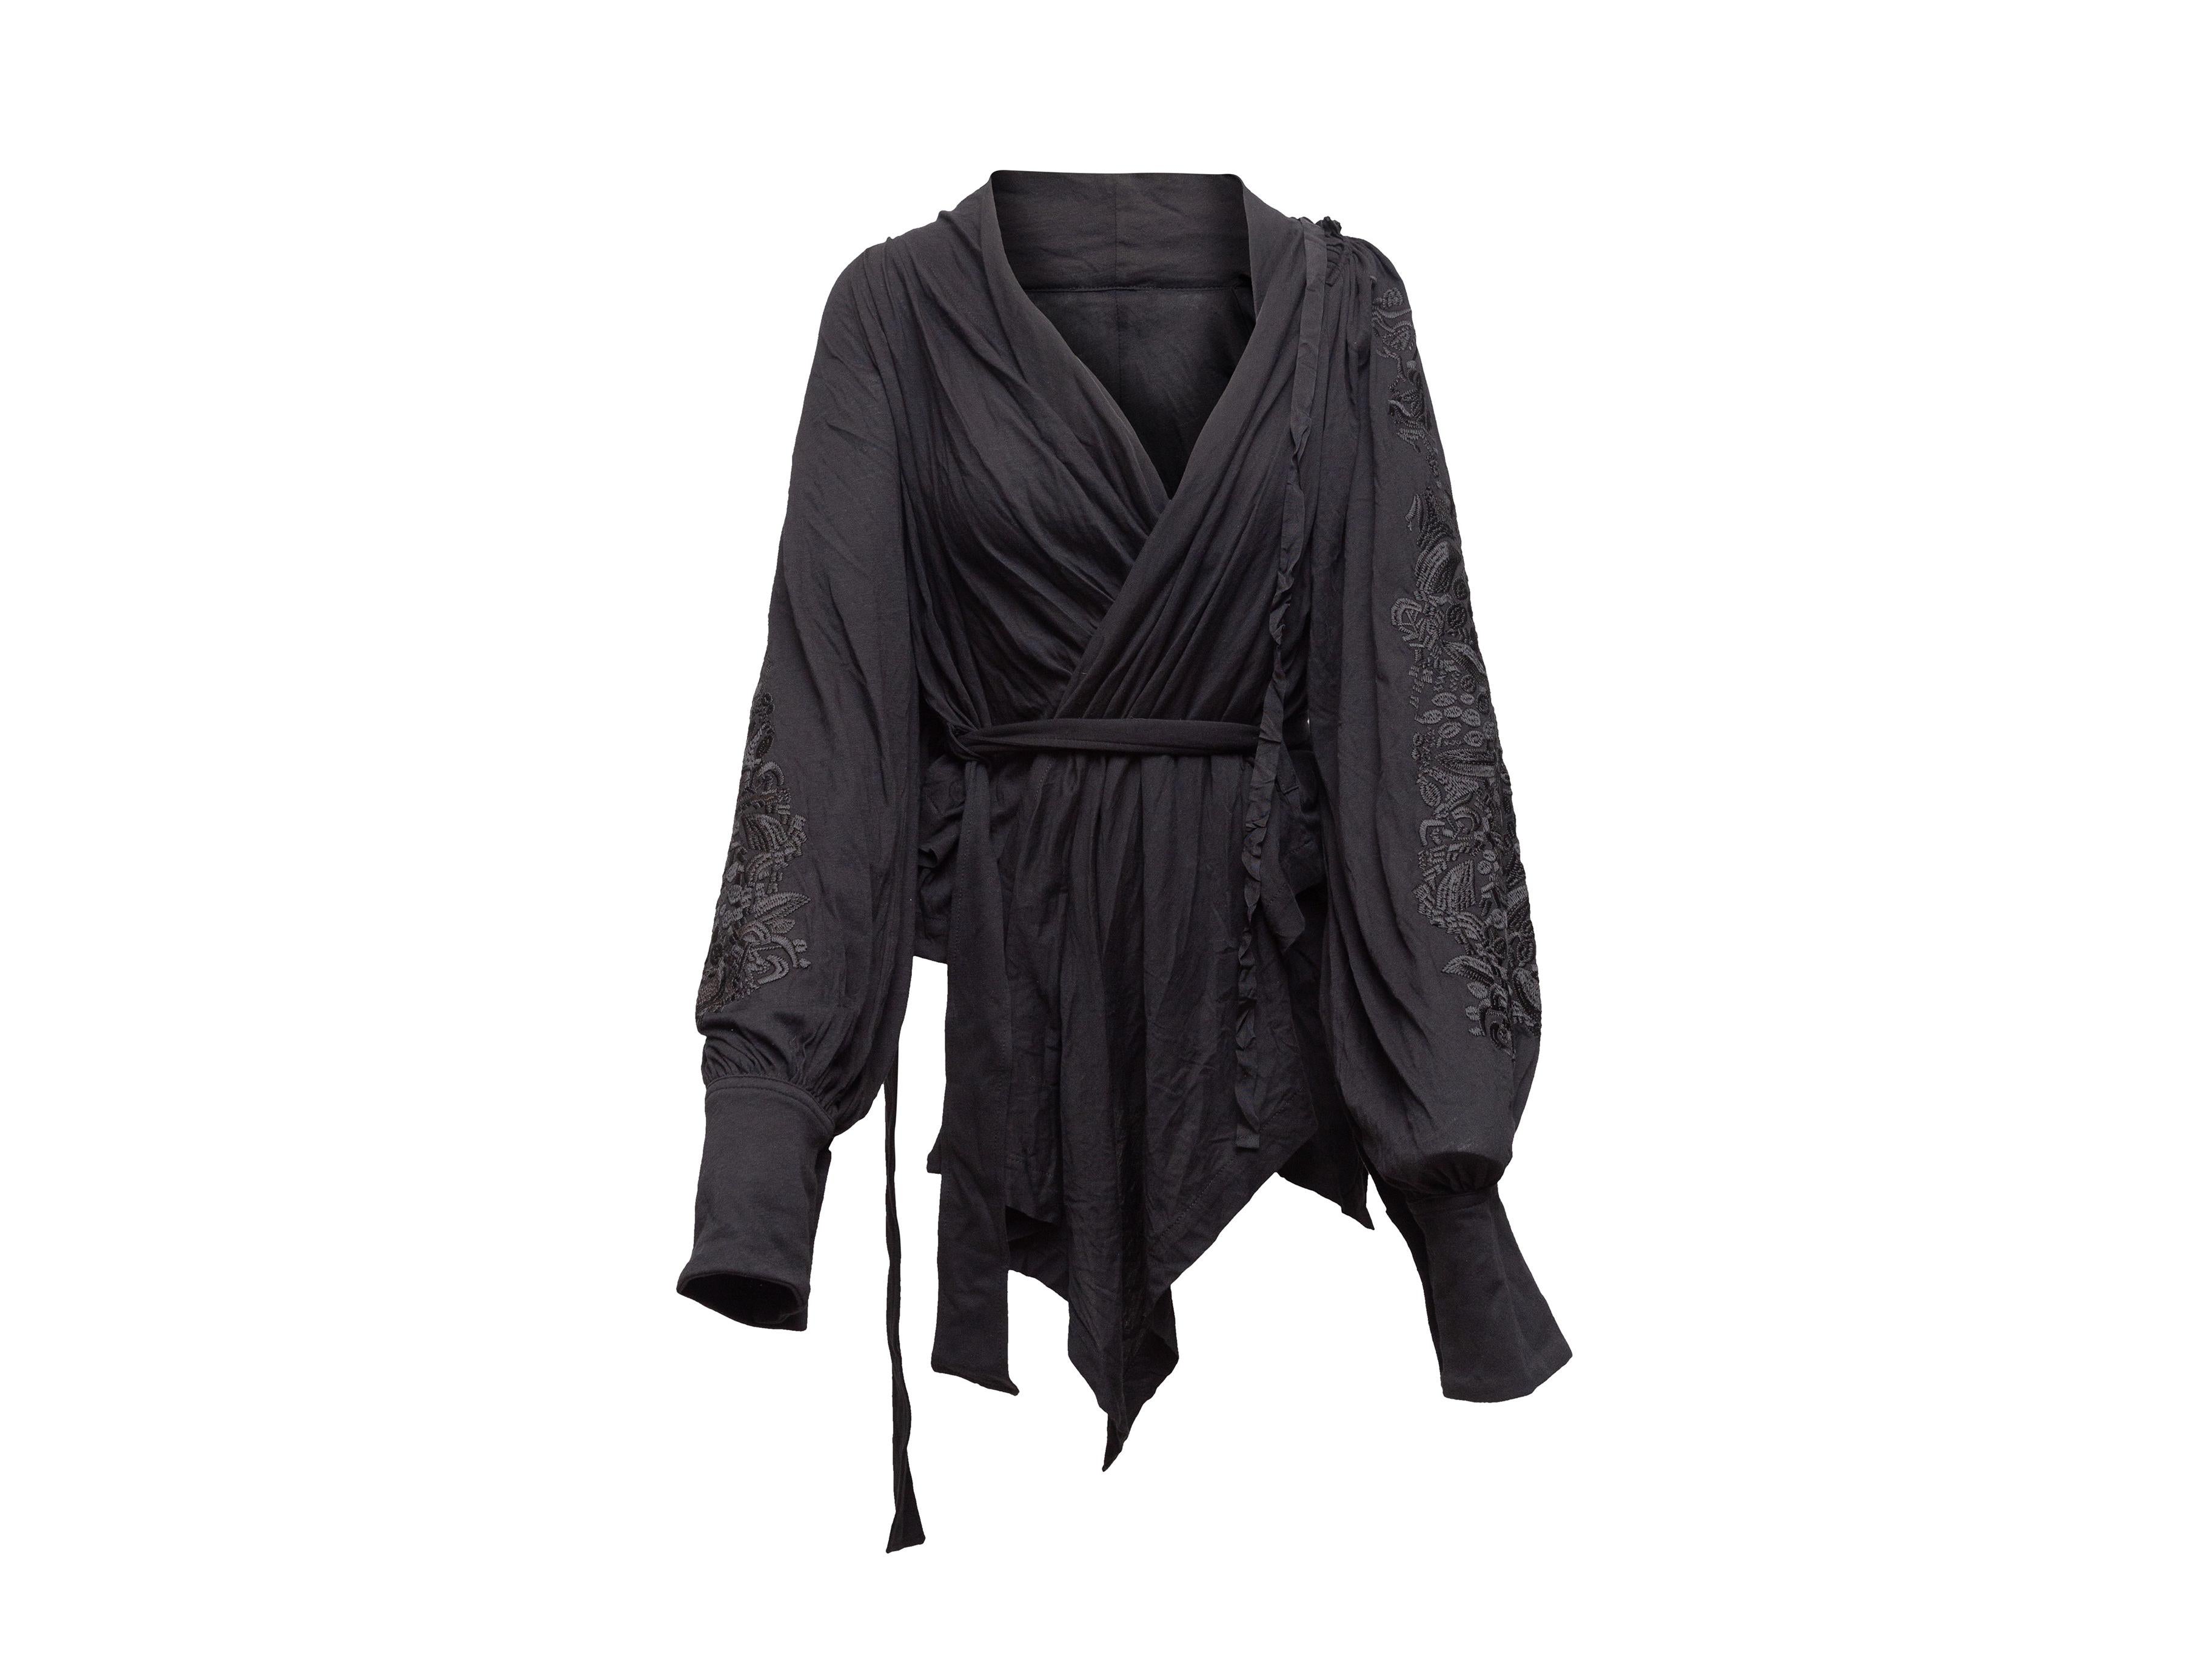 Product details: Black long sleeve wrap blouse by Ann Demeulemeester. Surplice neckline. Embroidery at sleeves. Asymmetrical hem. Sash tie at waist. Designer size 36. 36